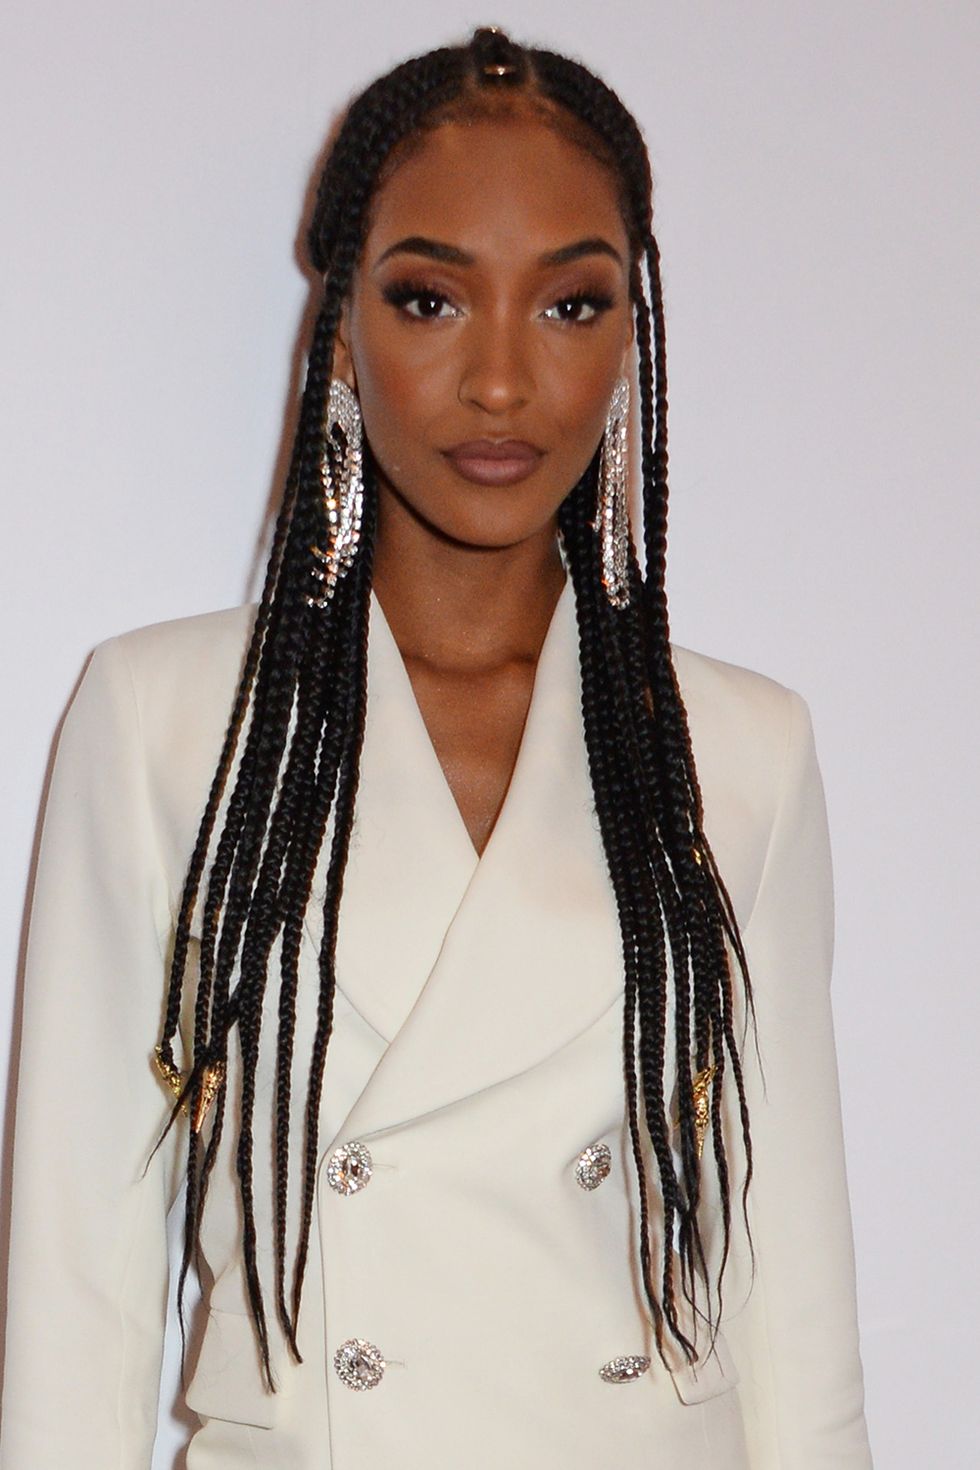 jourdan dunn calzedonia and jourdan dunn host a dinner in london to celebrate the winter campaign